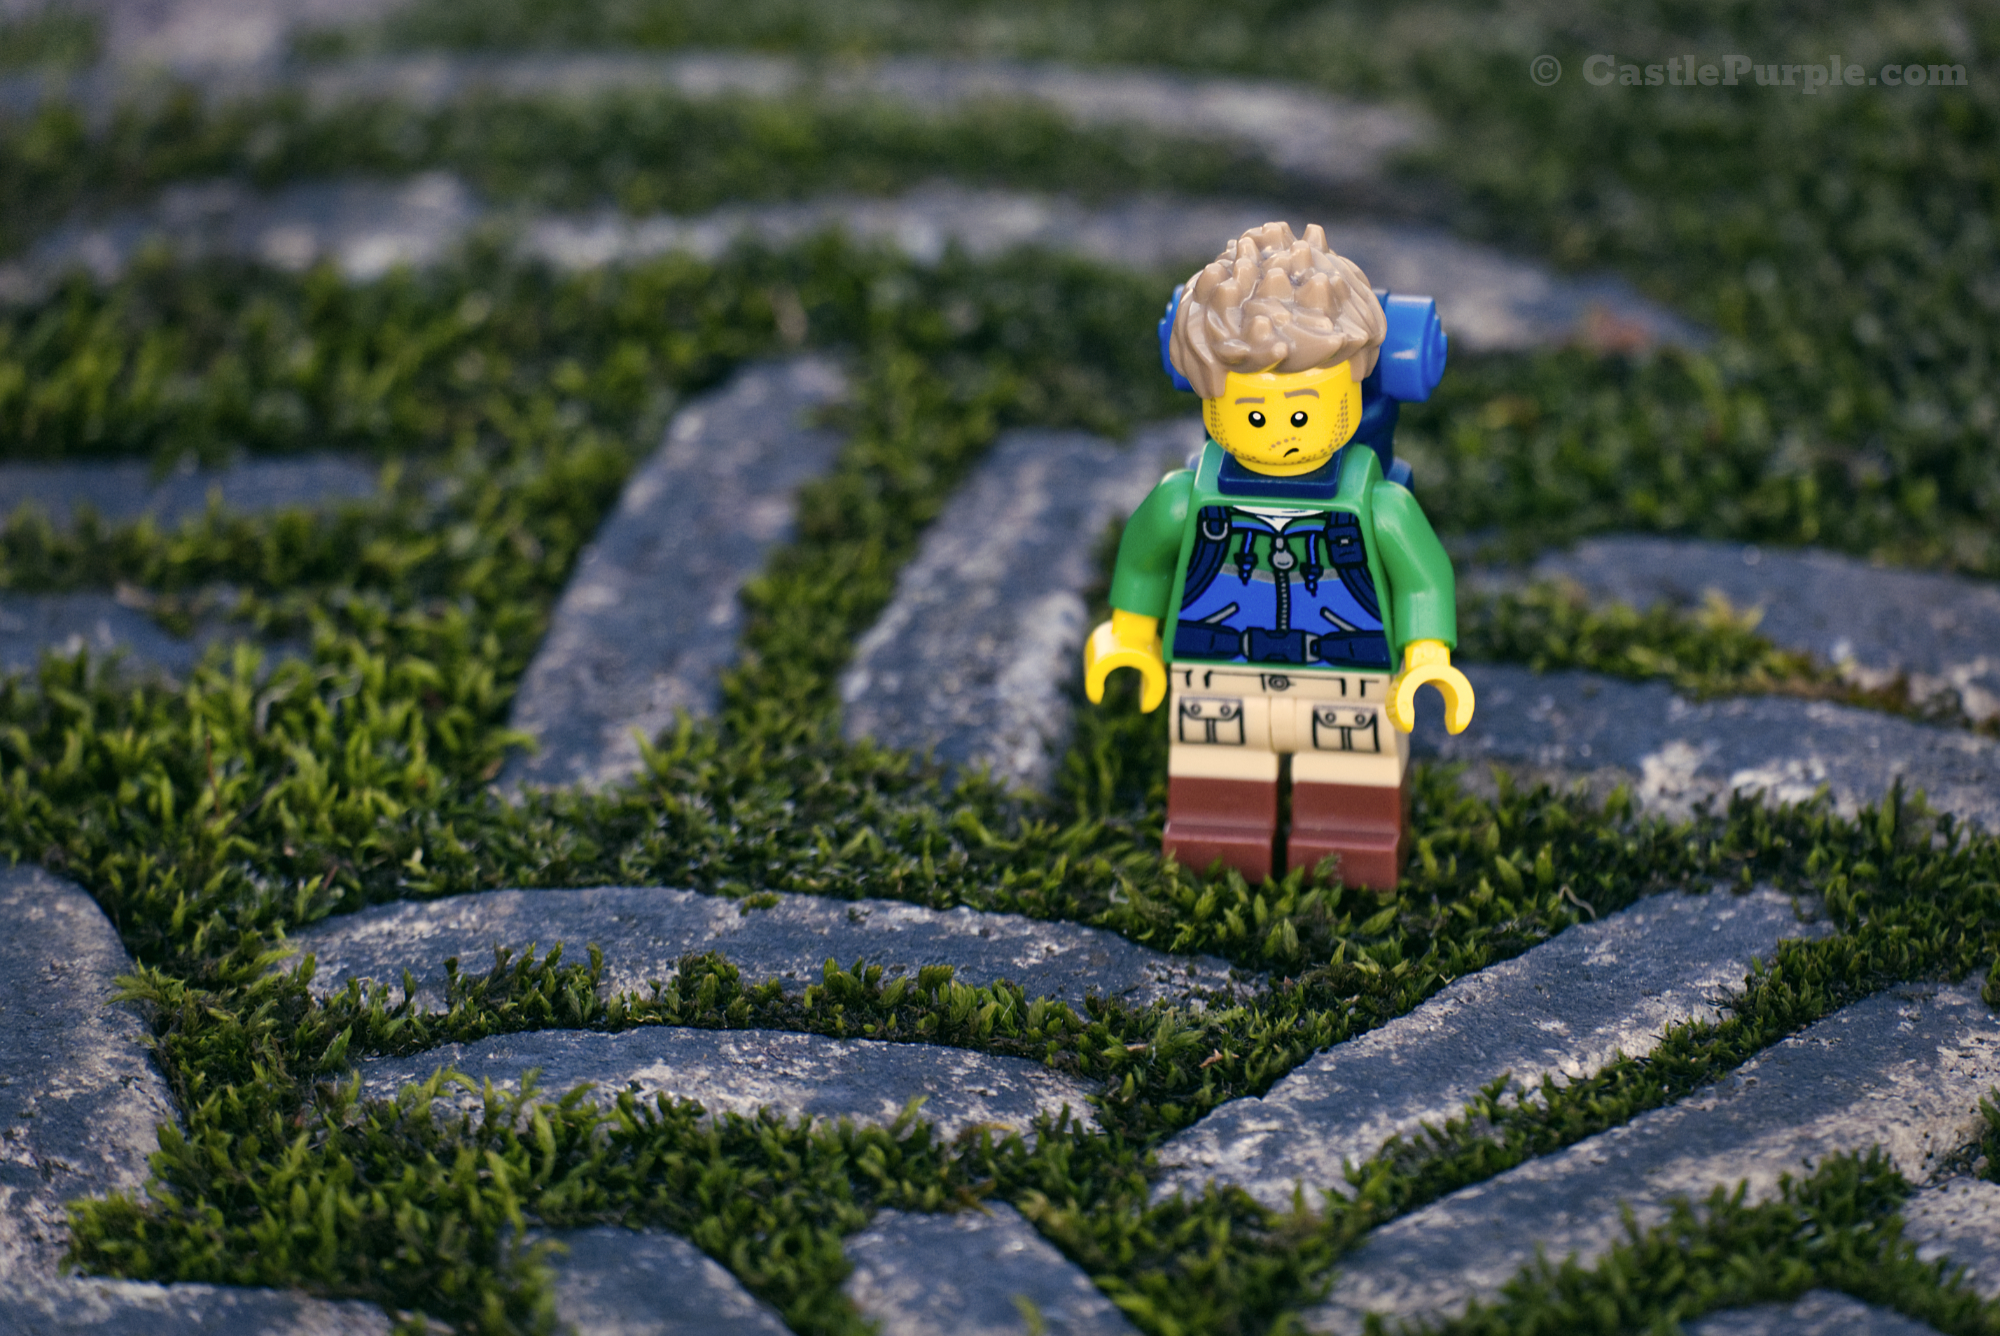 The Lego hiker minifigure stands on the ground surrounded by some raised stone markings with grass in between